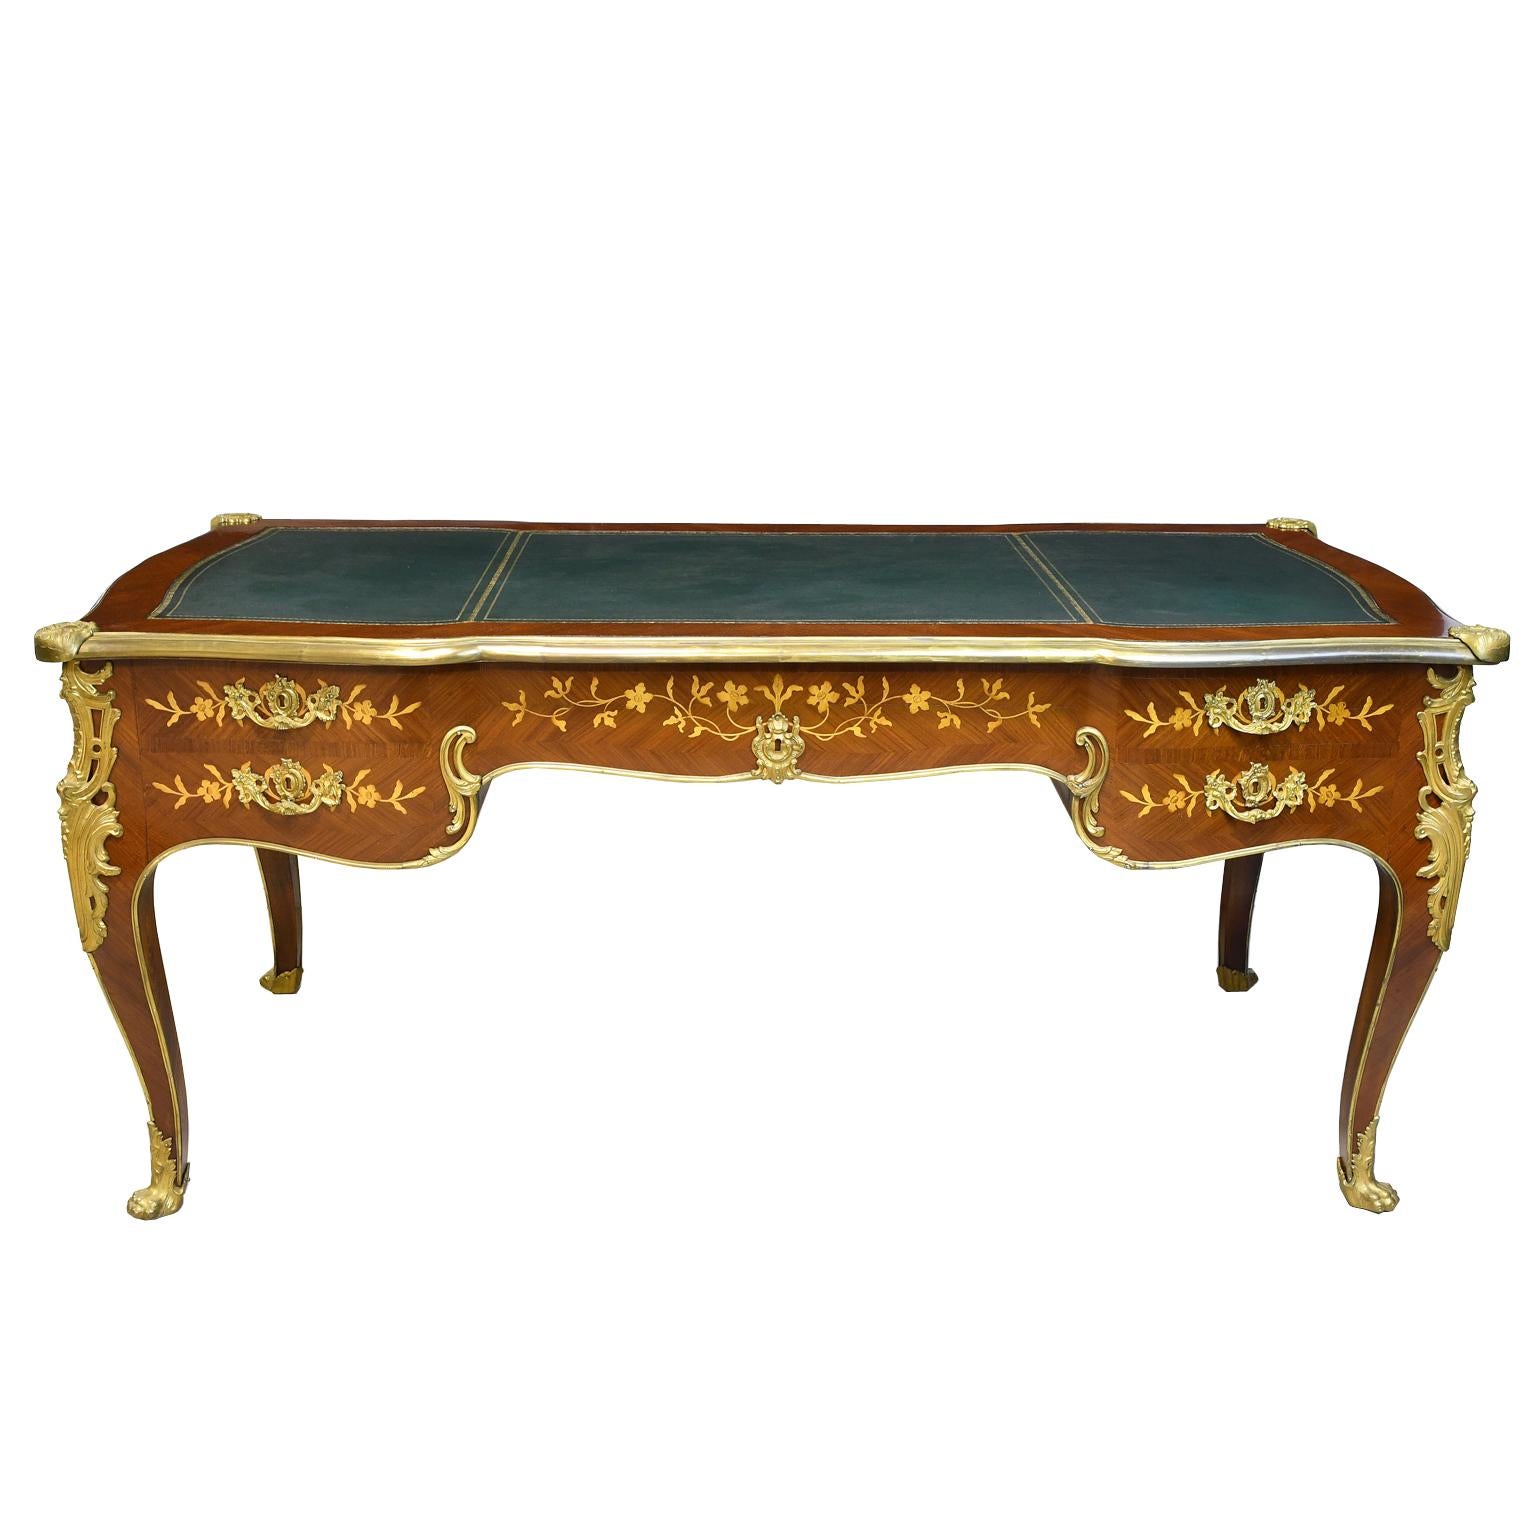 A very beautiful and well-crafted French bureau plat desk in fine mahogany with parquetry & satinwood marquetry inlays of flowers & foliage that have been hand-colored. The finely articulated ormolu mounts, sabots, and hardware were originally